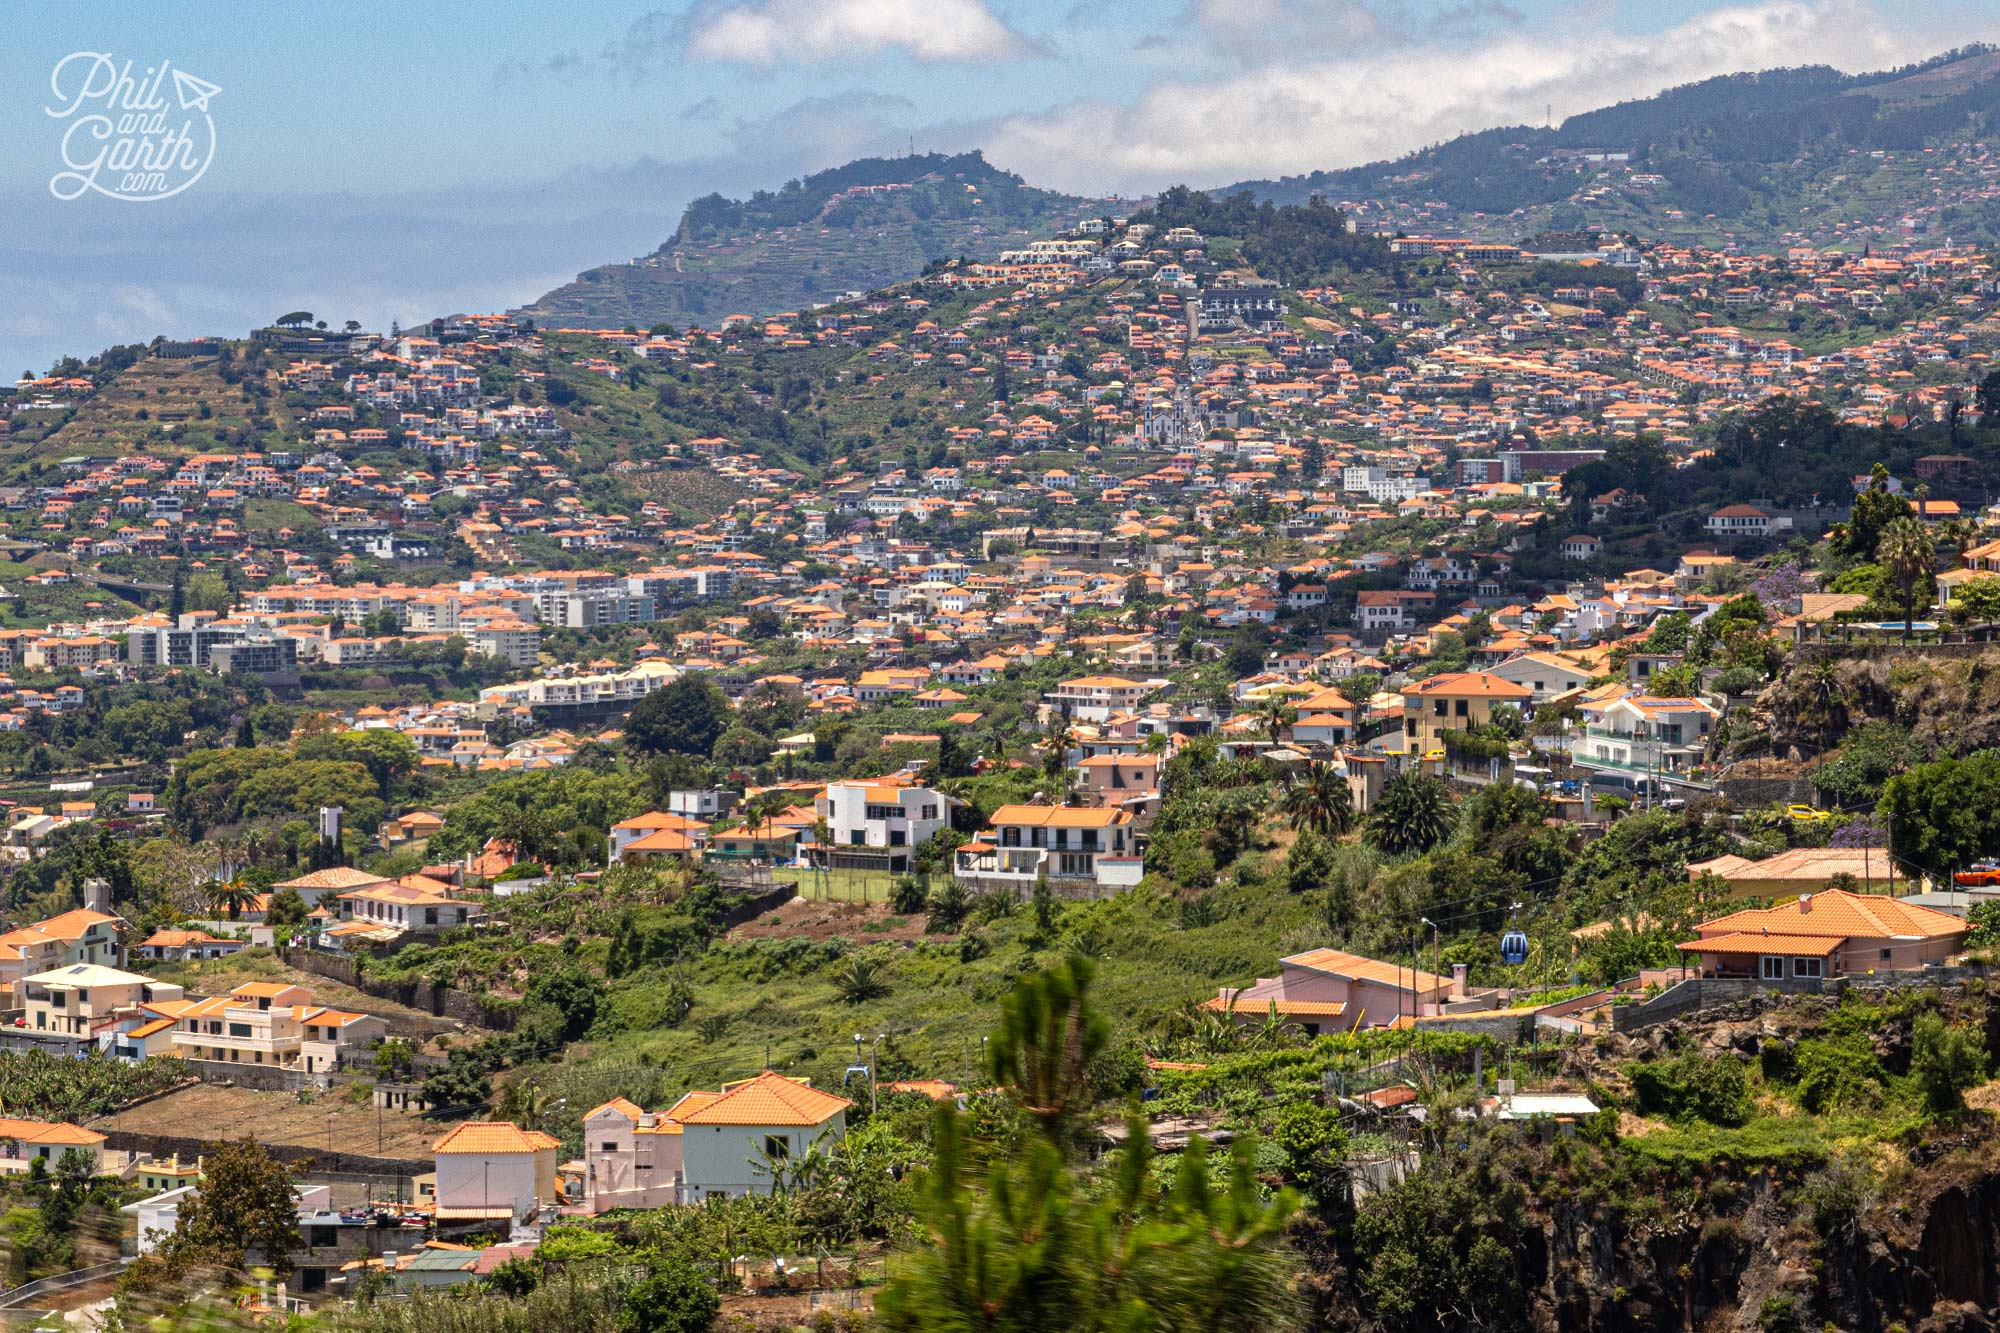 Amazing views of Funchal's lush green landscape